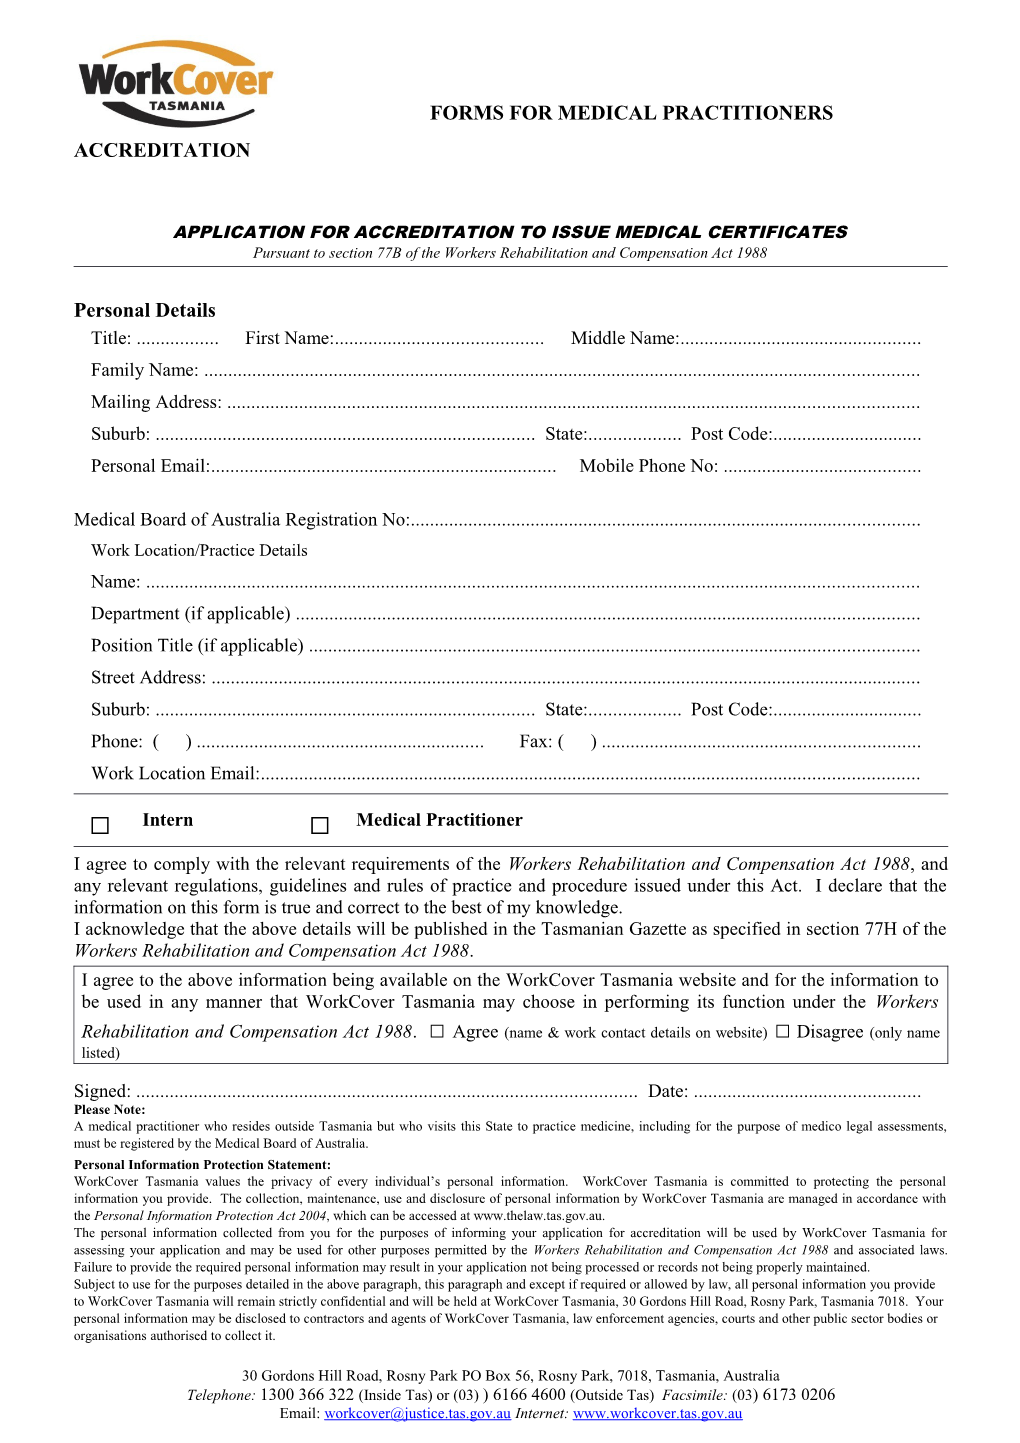 Application for Accreditation to Issue Workers Compensation Medical Certificates